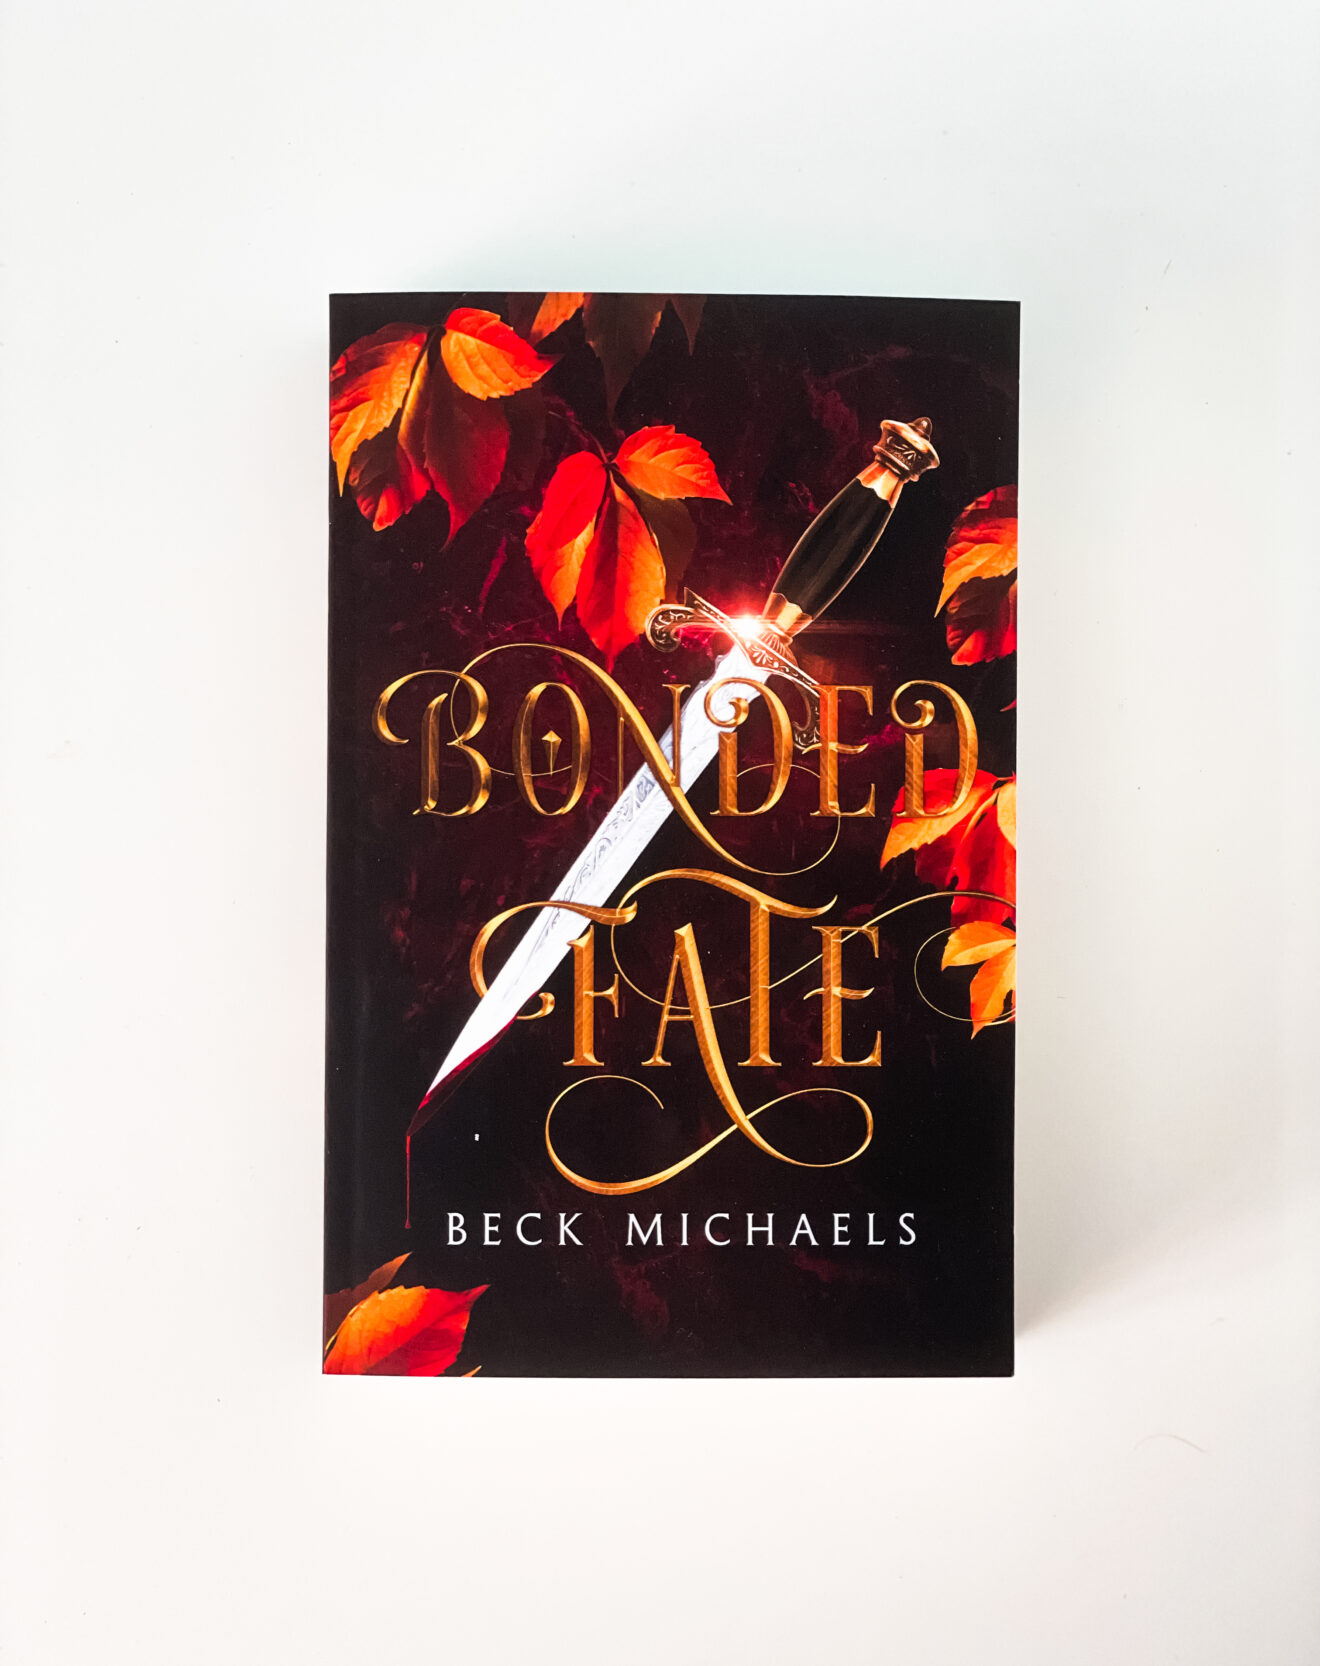 Bonded Fate by Beck Michaels